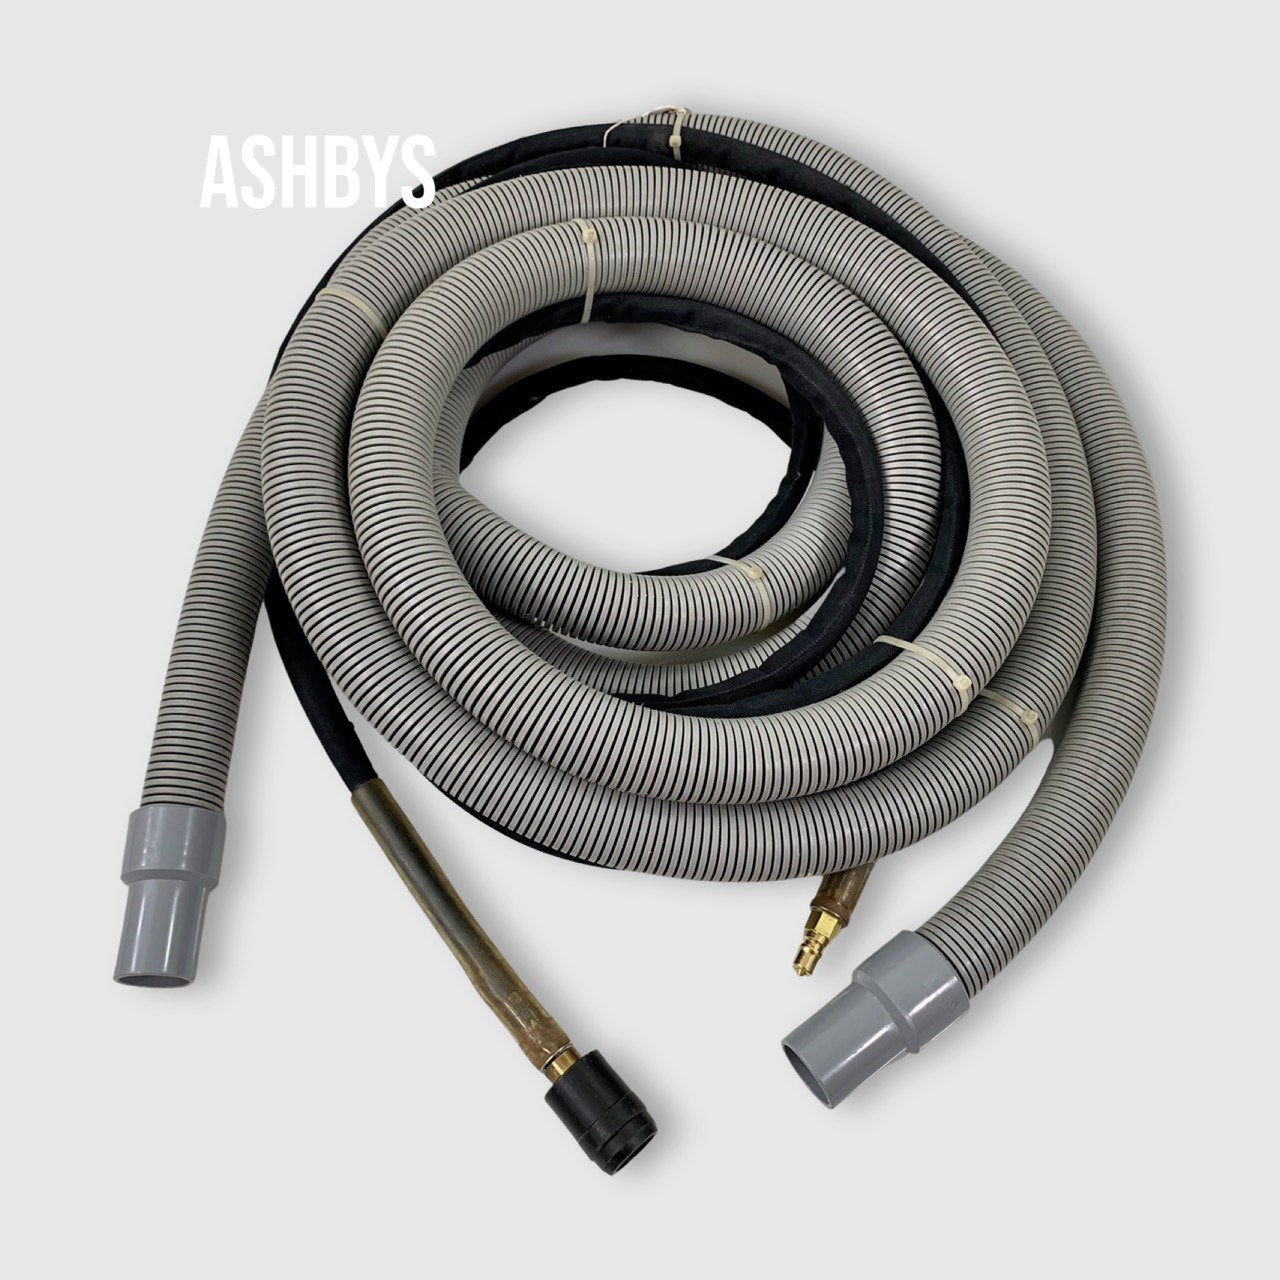 PRE-OWNED 25ft / 7.5m V2 Fully Heat Insulated 1.5 inch GREY Hose Set